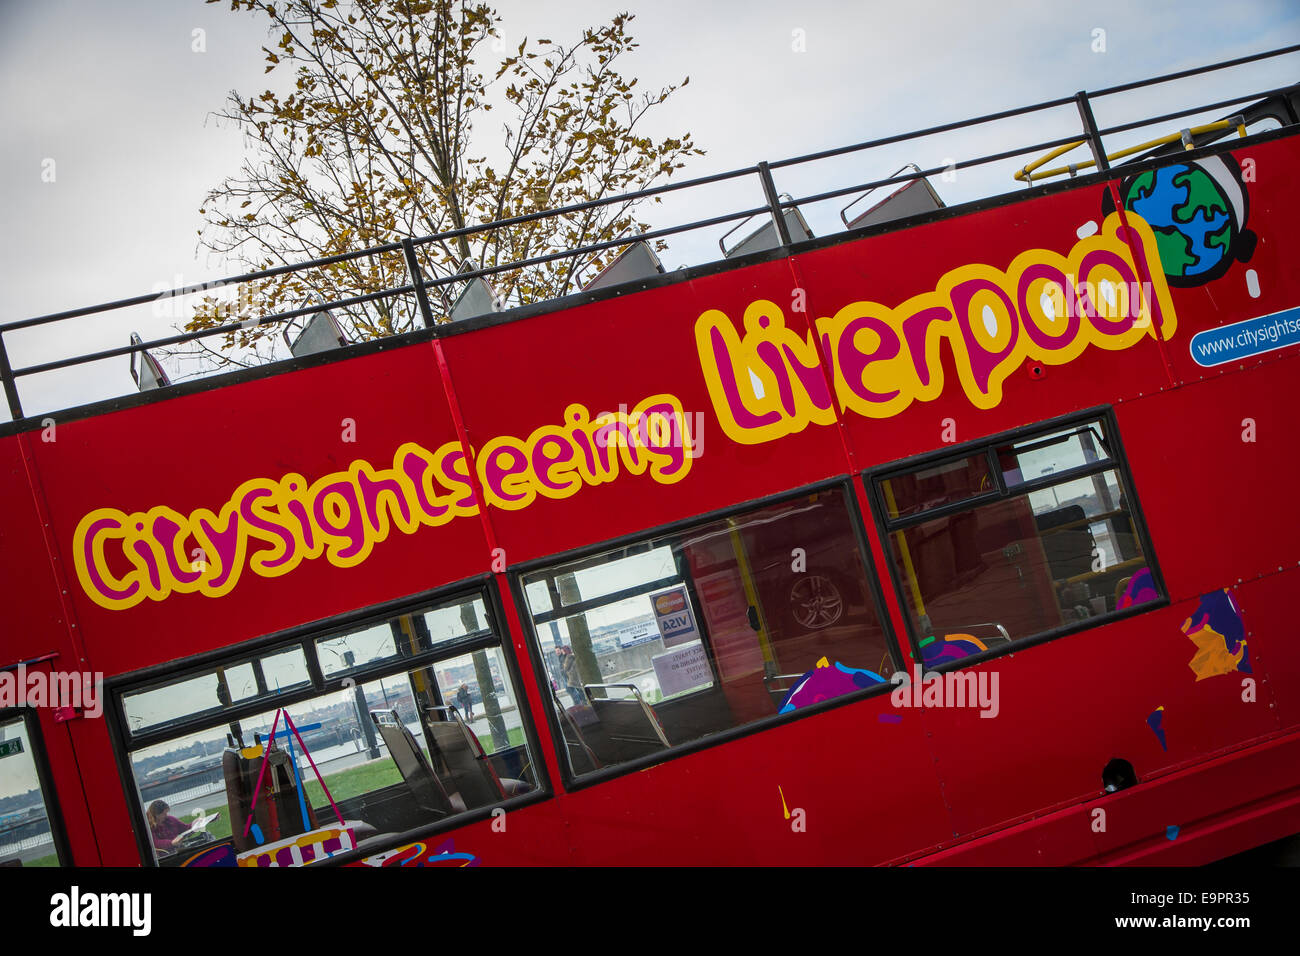 An open top sight seeing bus in Liverpool Stock Photo